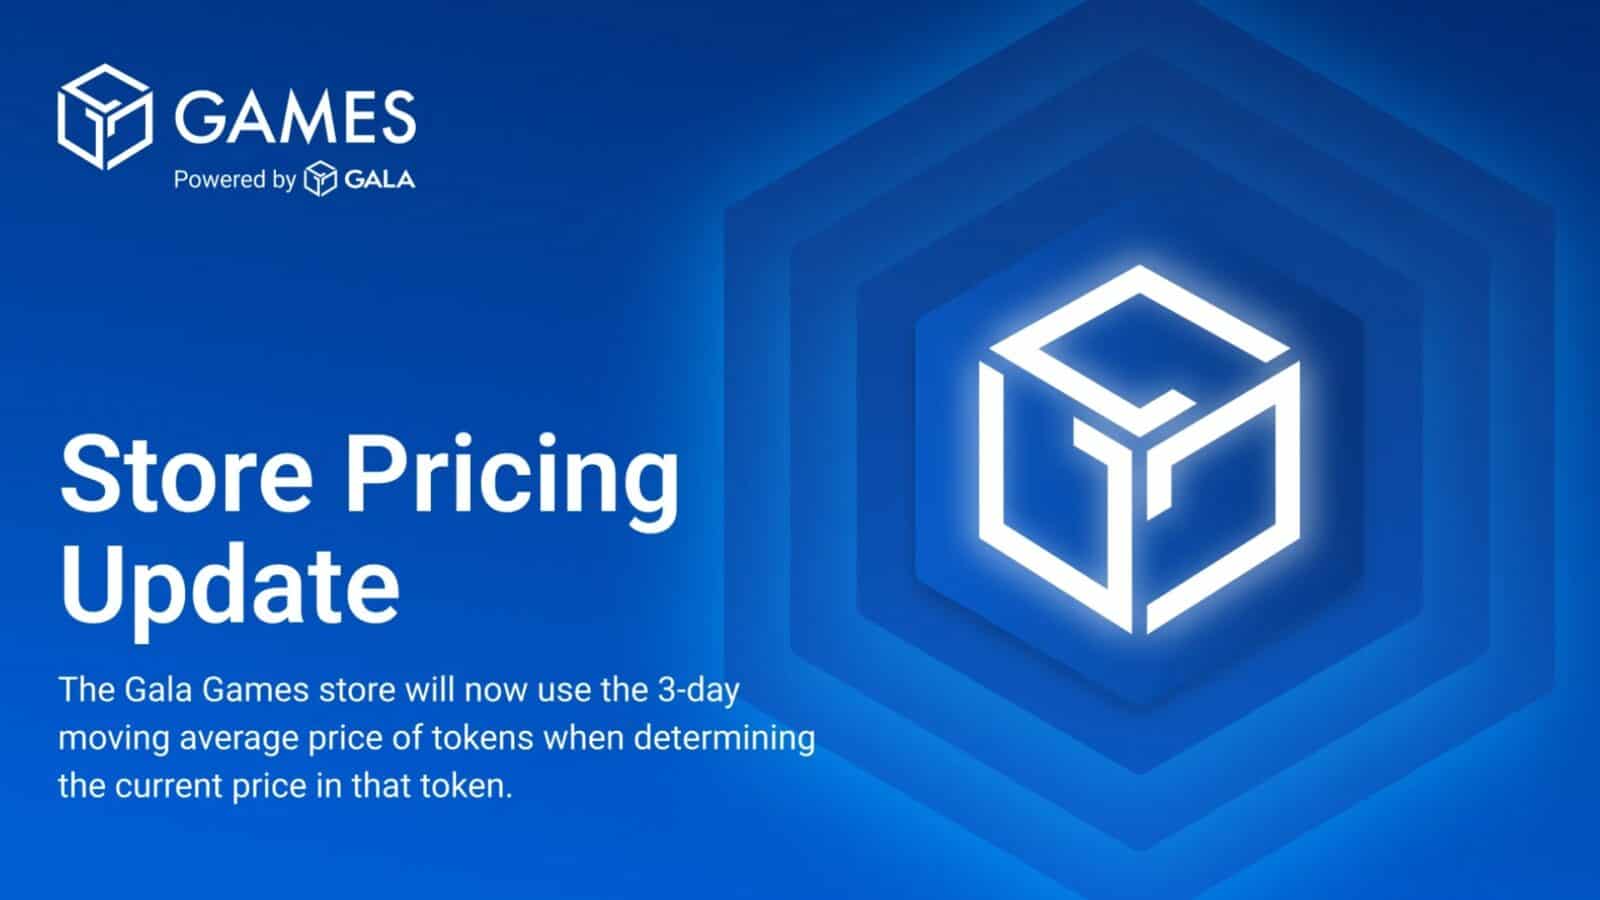 Gala Games Introduces a Stable Pricing Strategy to Combat Market Volatility